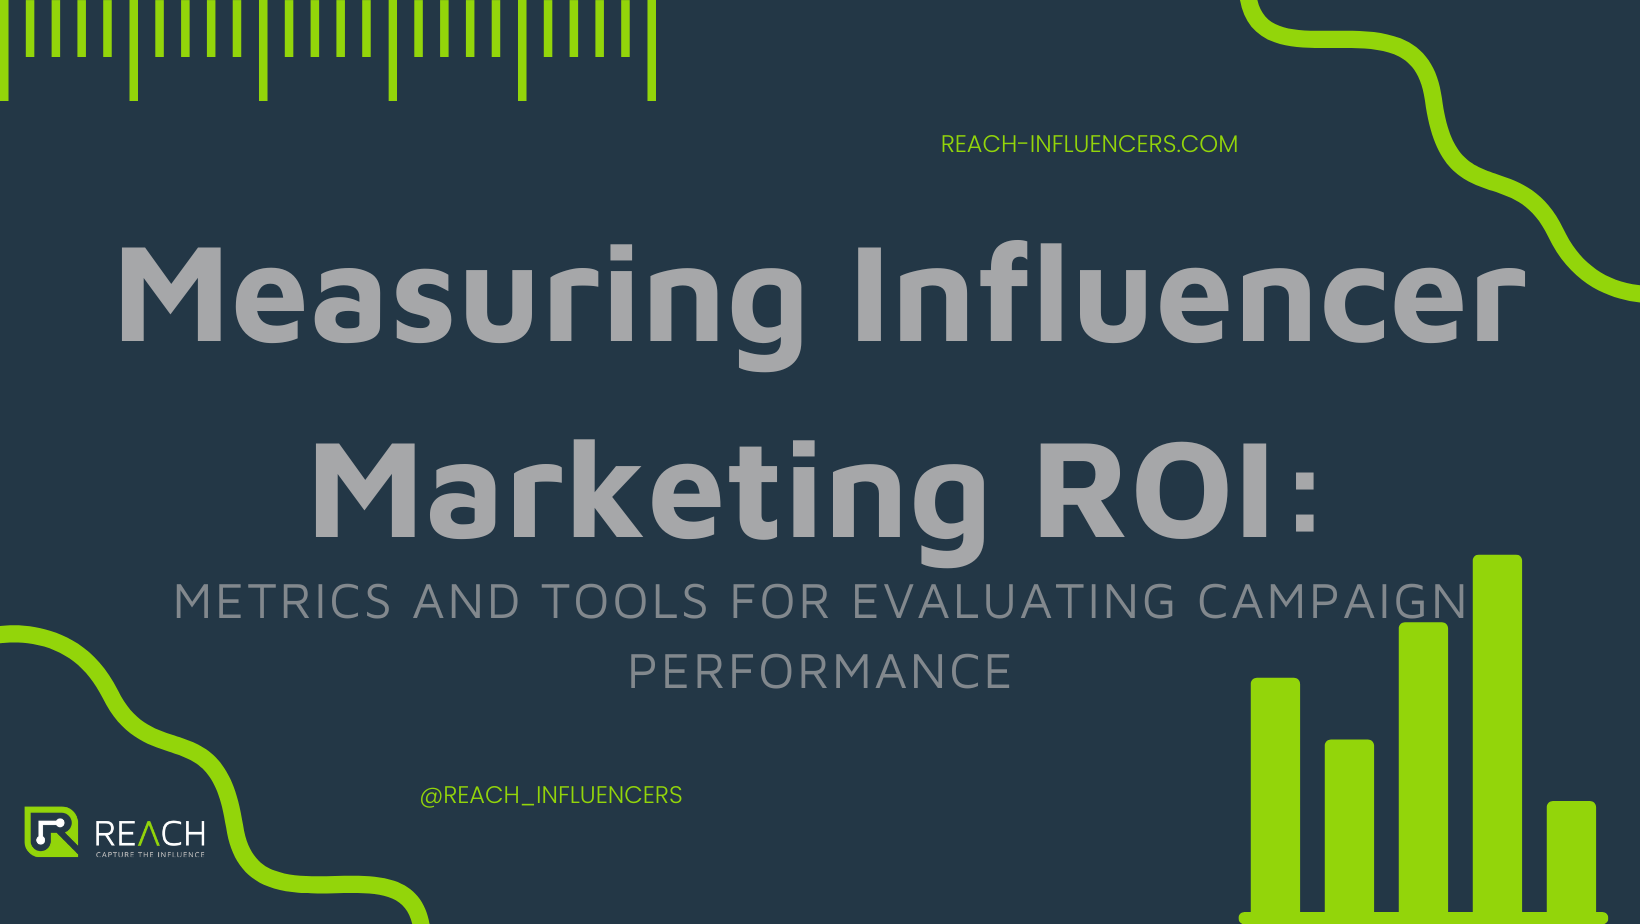 Learn how to measure the effectiveness of influencer marketing campaigns with this comprehensive guide on evaluating ROI using essential metrics and tools.